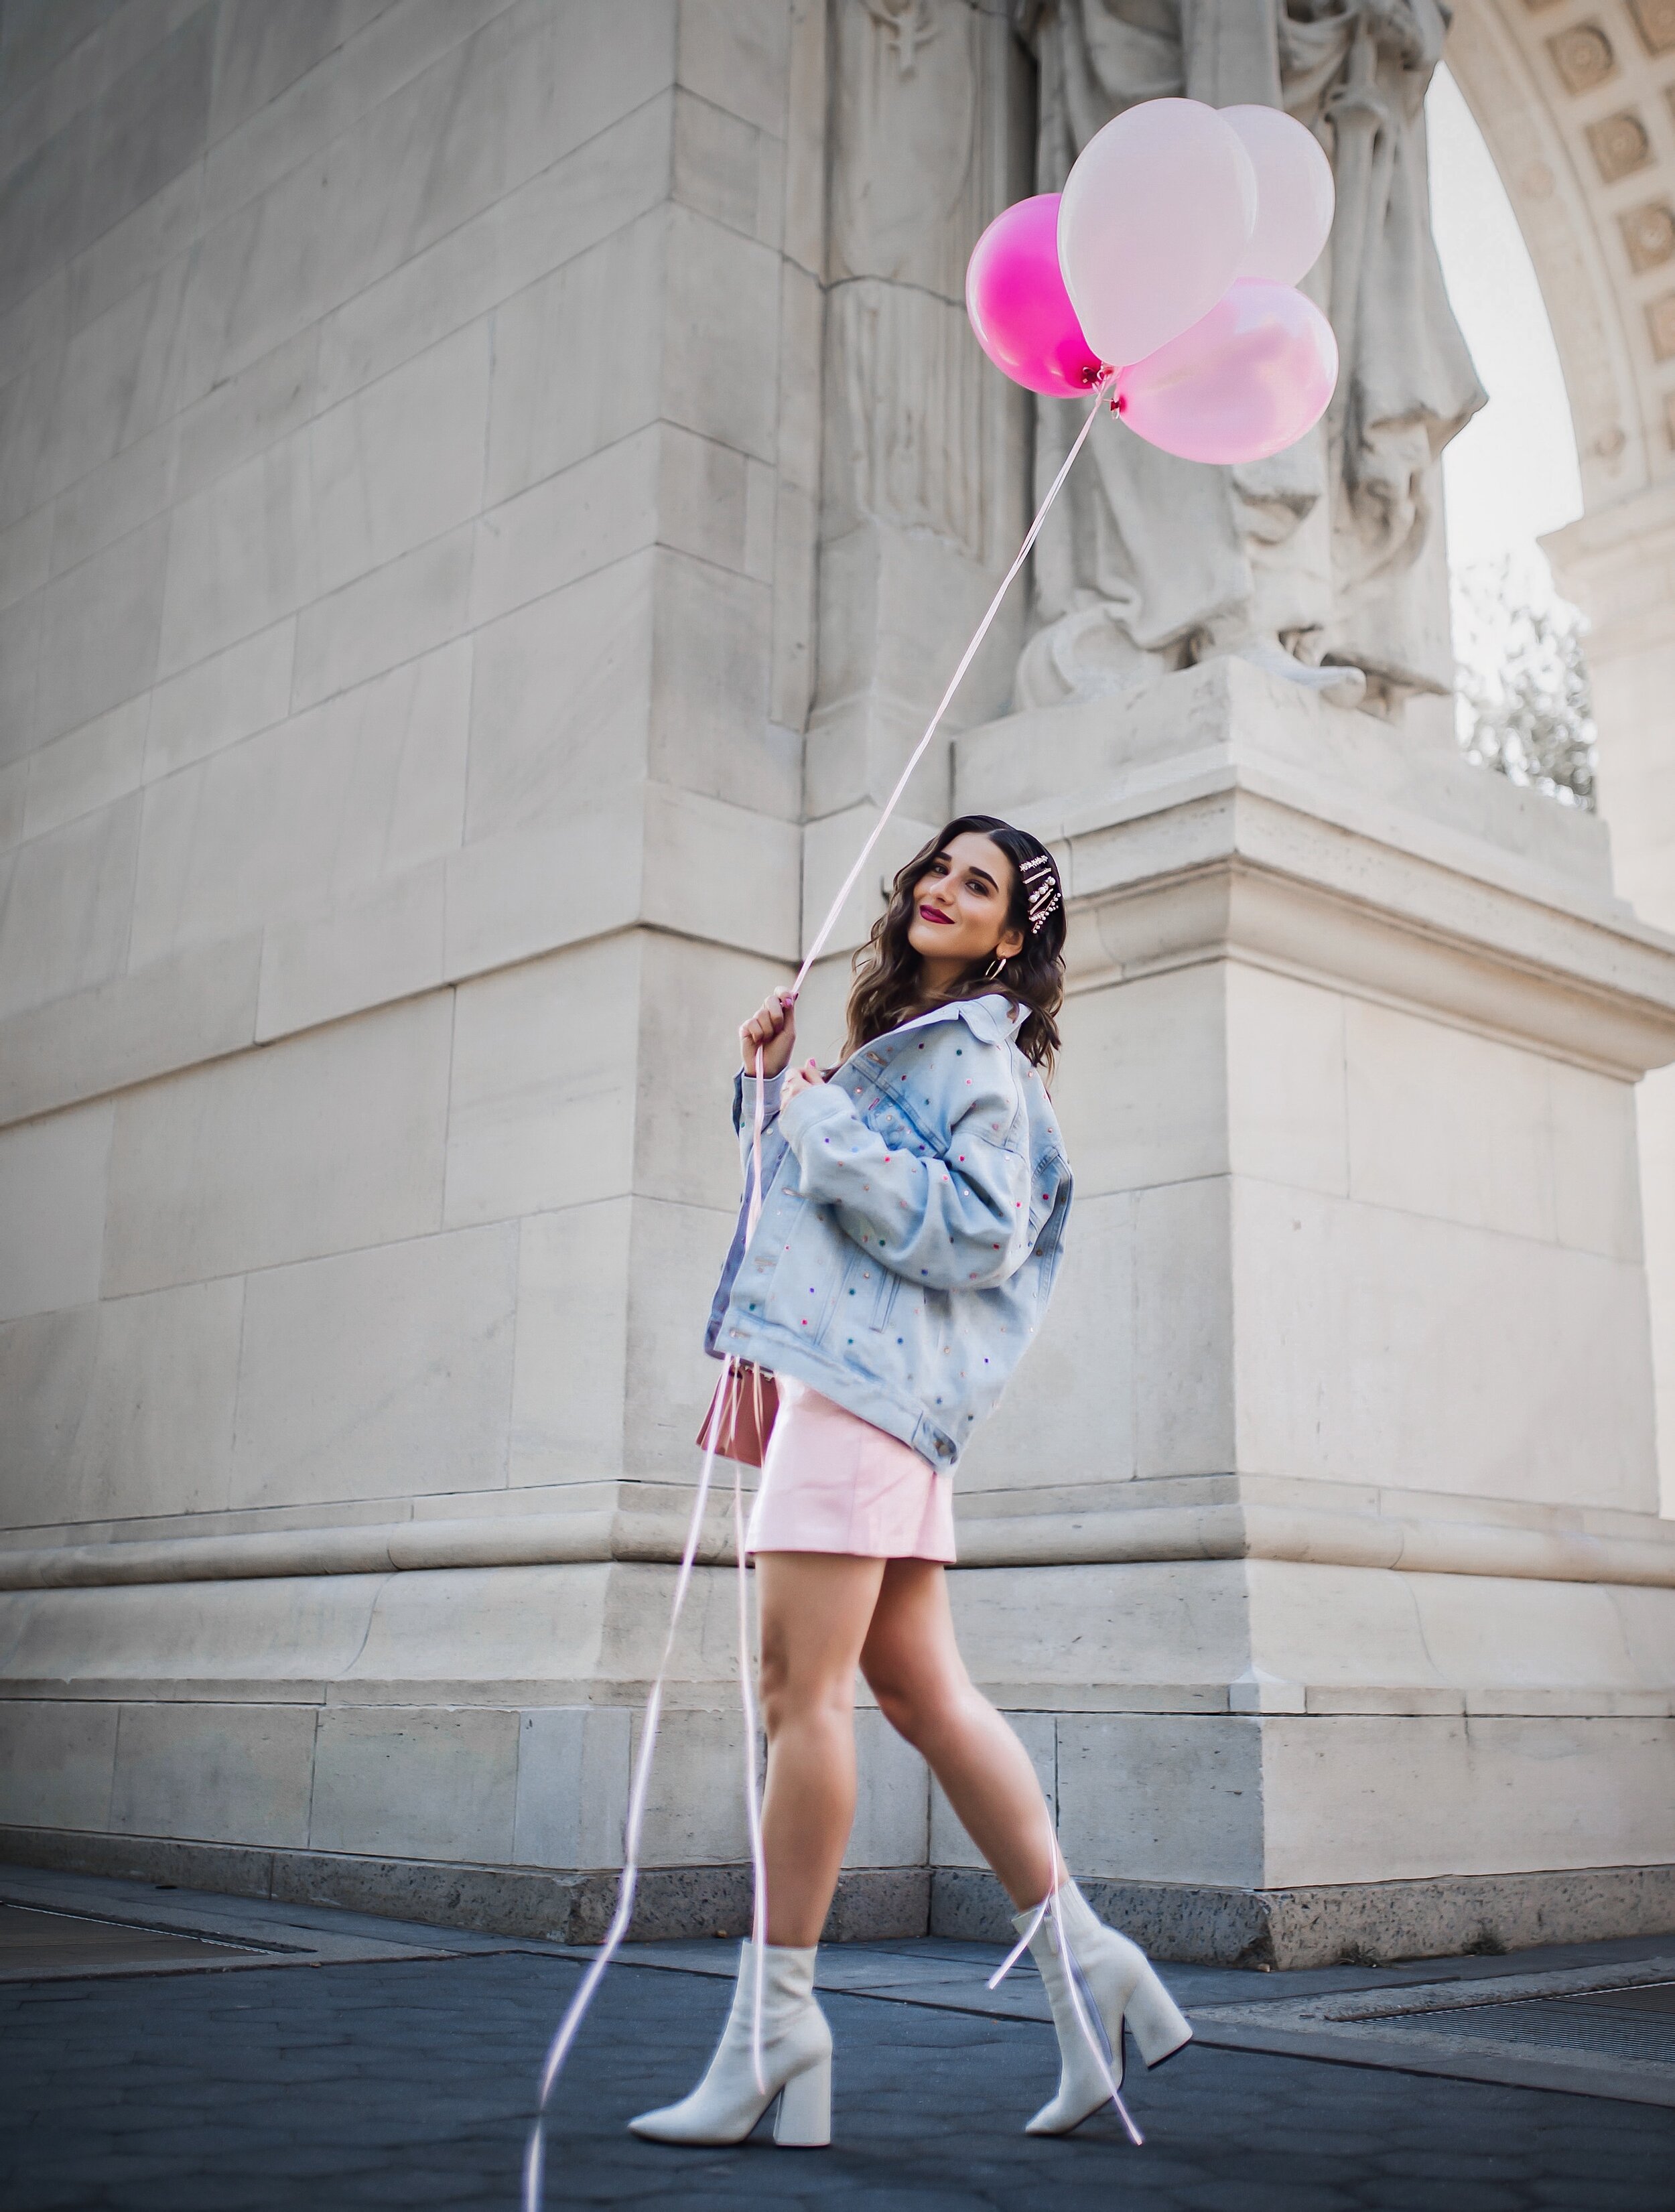 The Final Year Of My 20's Happy 29th Birthday Esther Santer NYC Street Style Blogger White Booties Trend Jeweled Jean  Jacket Levis Denim Pink Balooons Leather Skirt Hair Clips Accessories Pastel Blue Shoes New Yoek City Inspo Shoot Washington Square.JPG